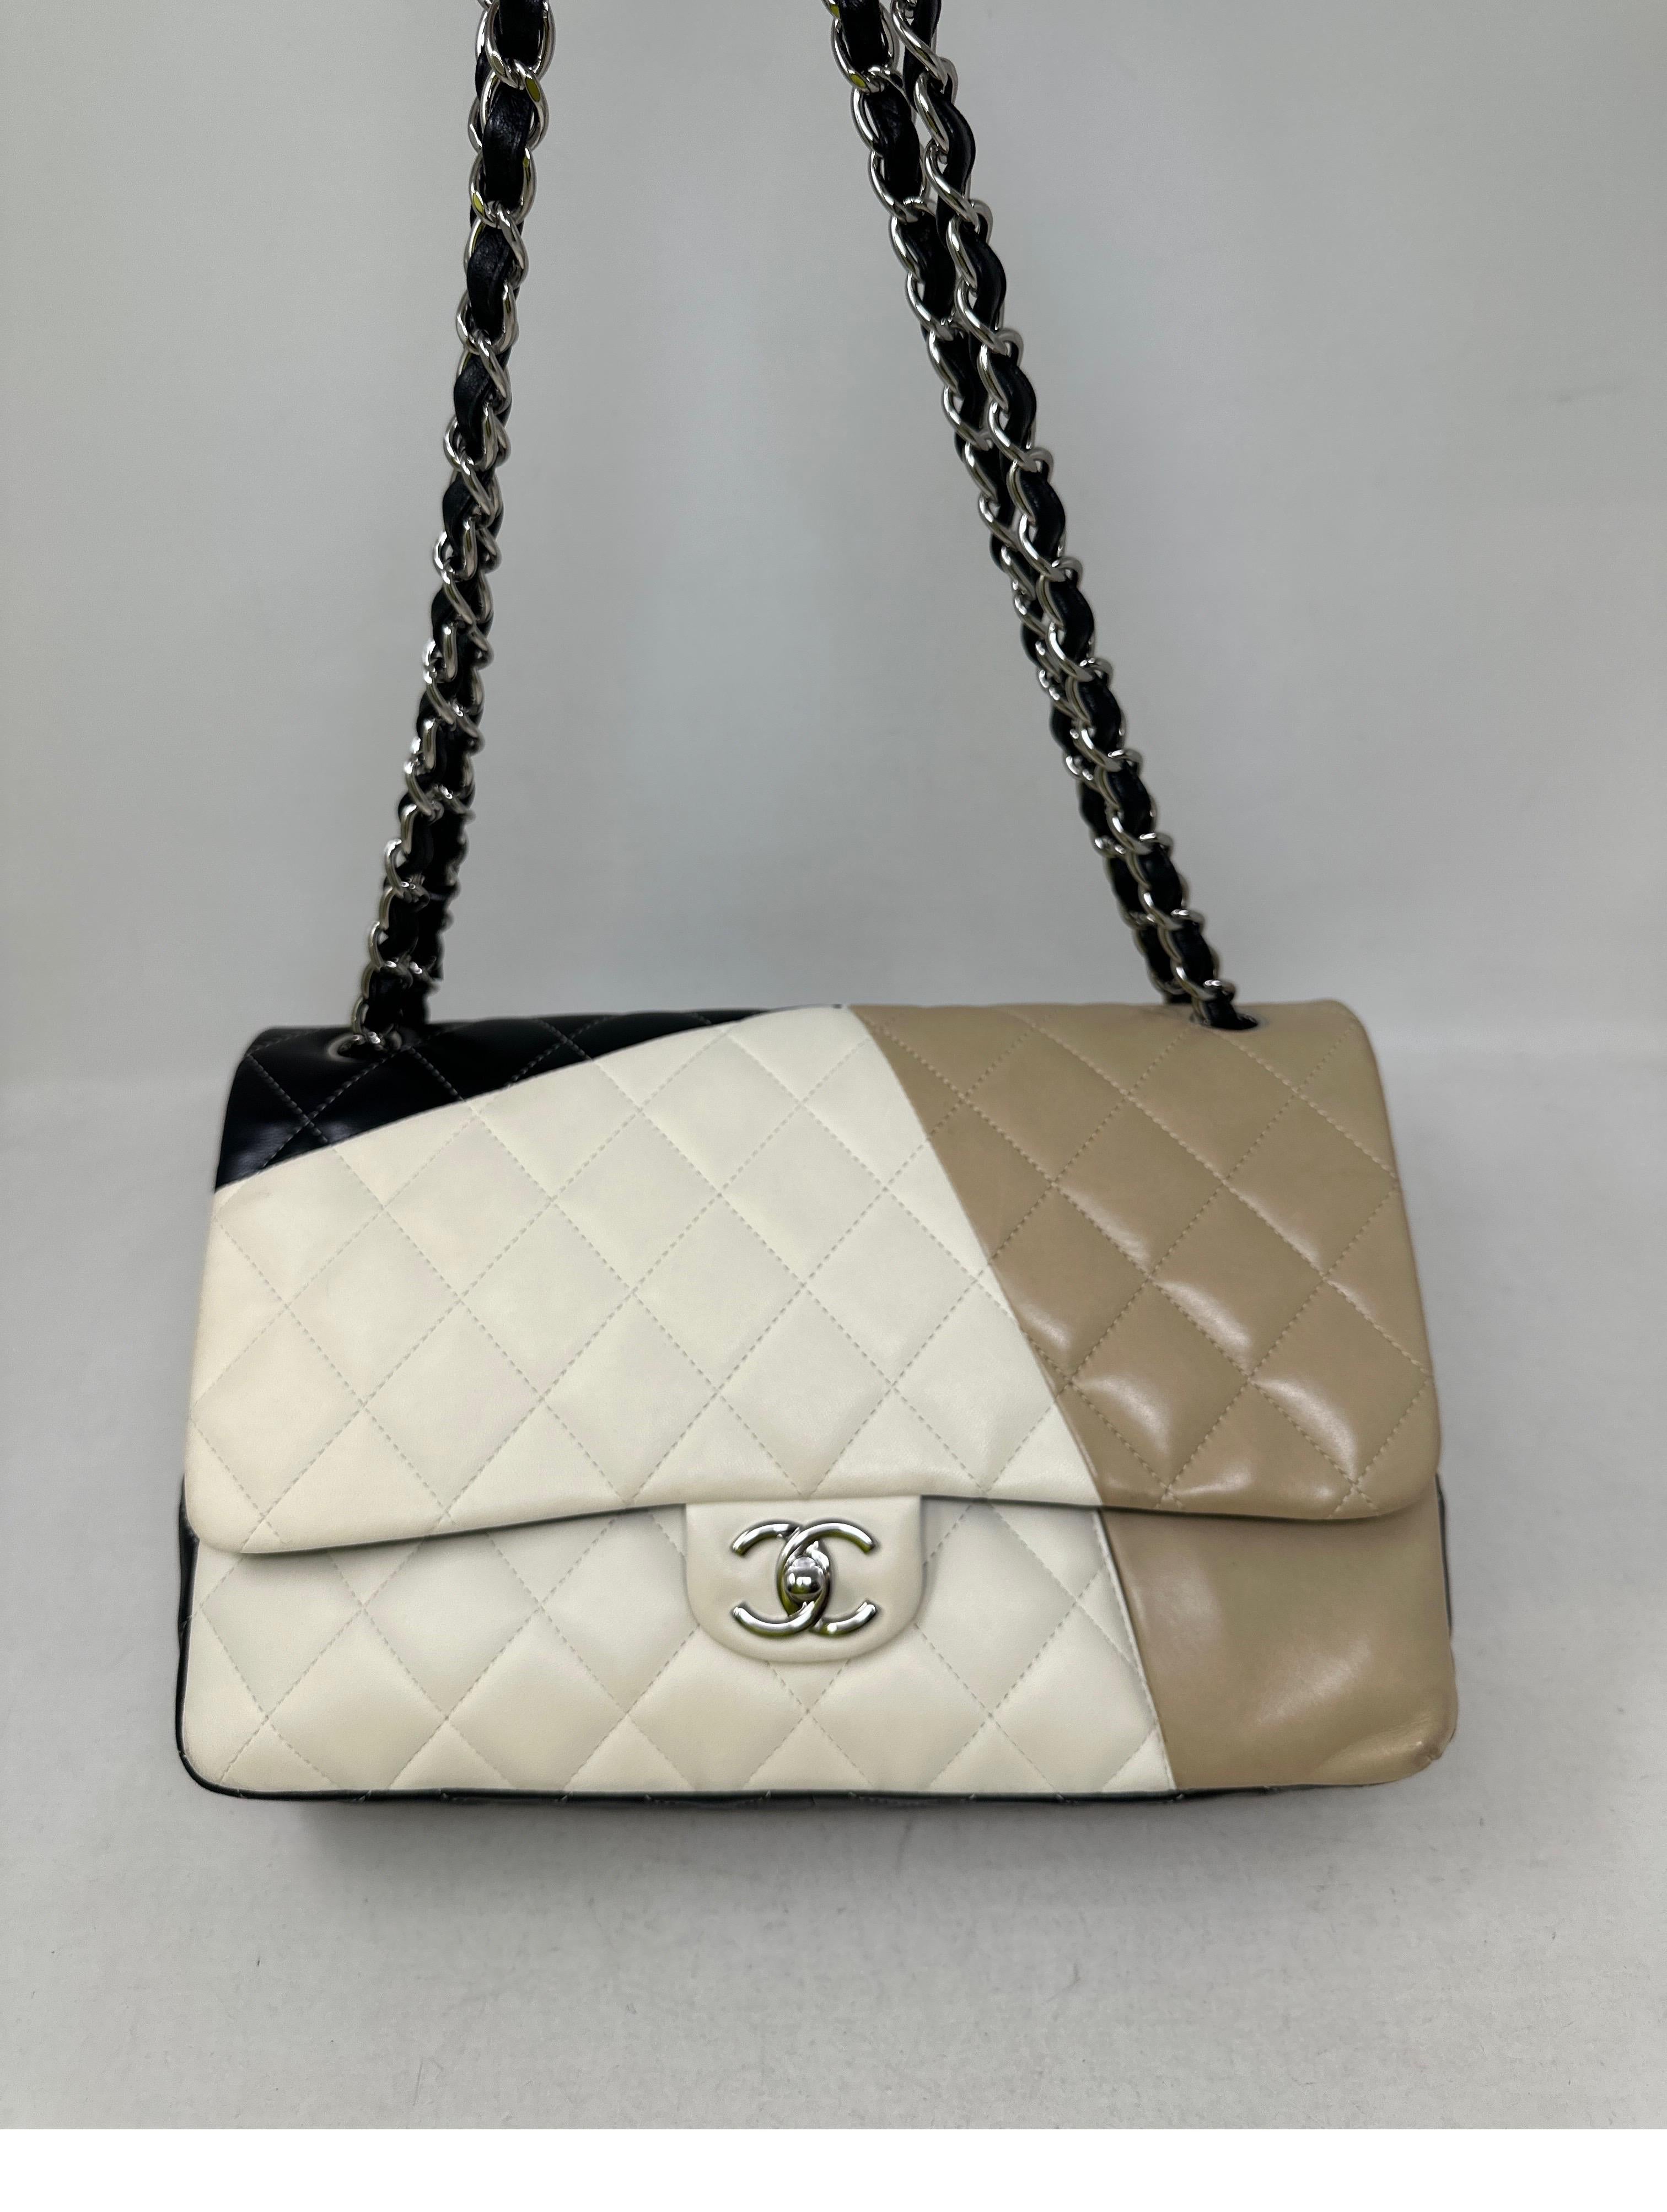 Chanel Multi-Color Jumbo Bag  In Good Condition For Sale In Athens, GA